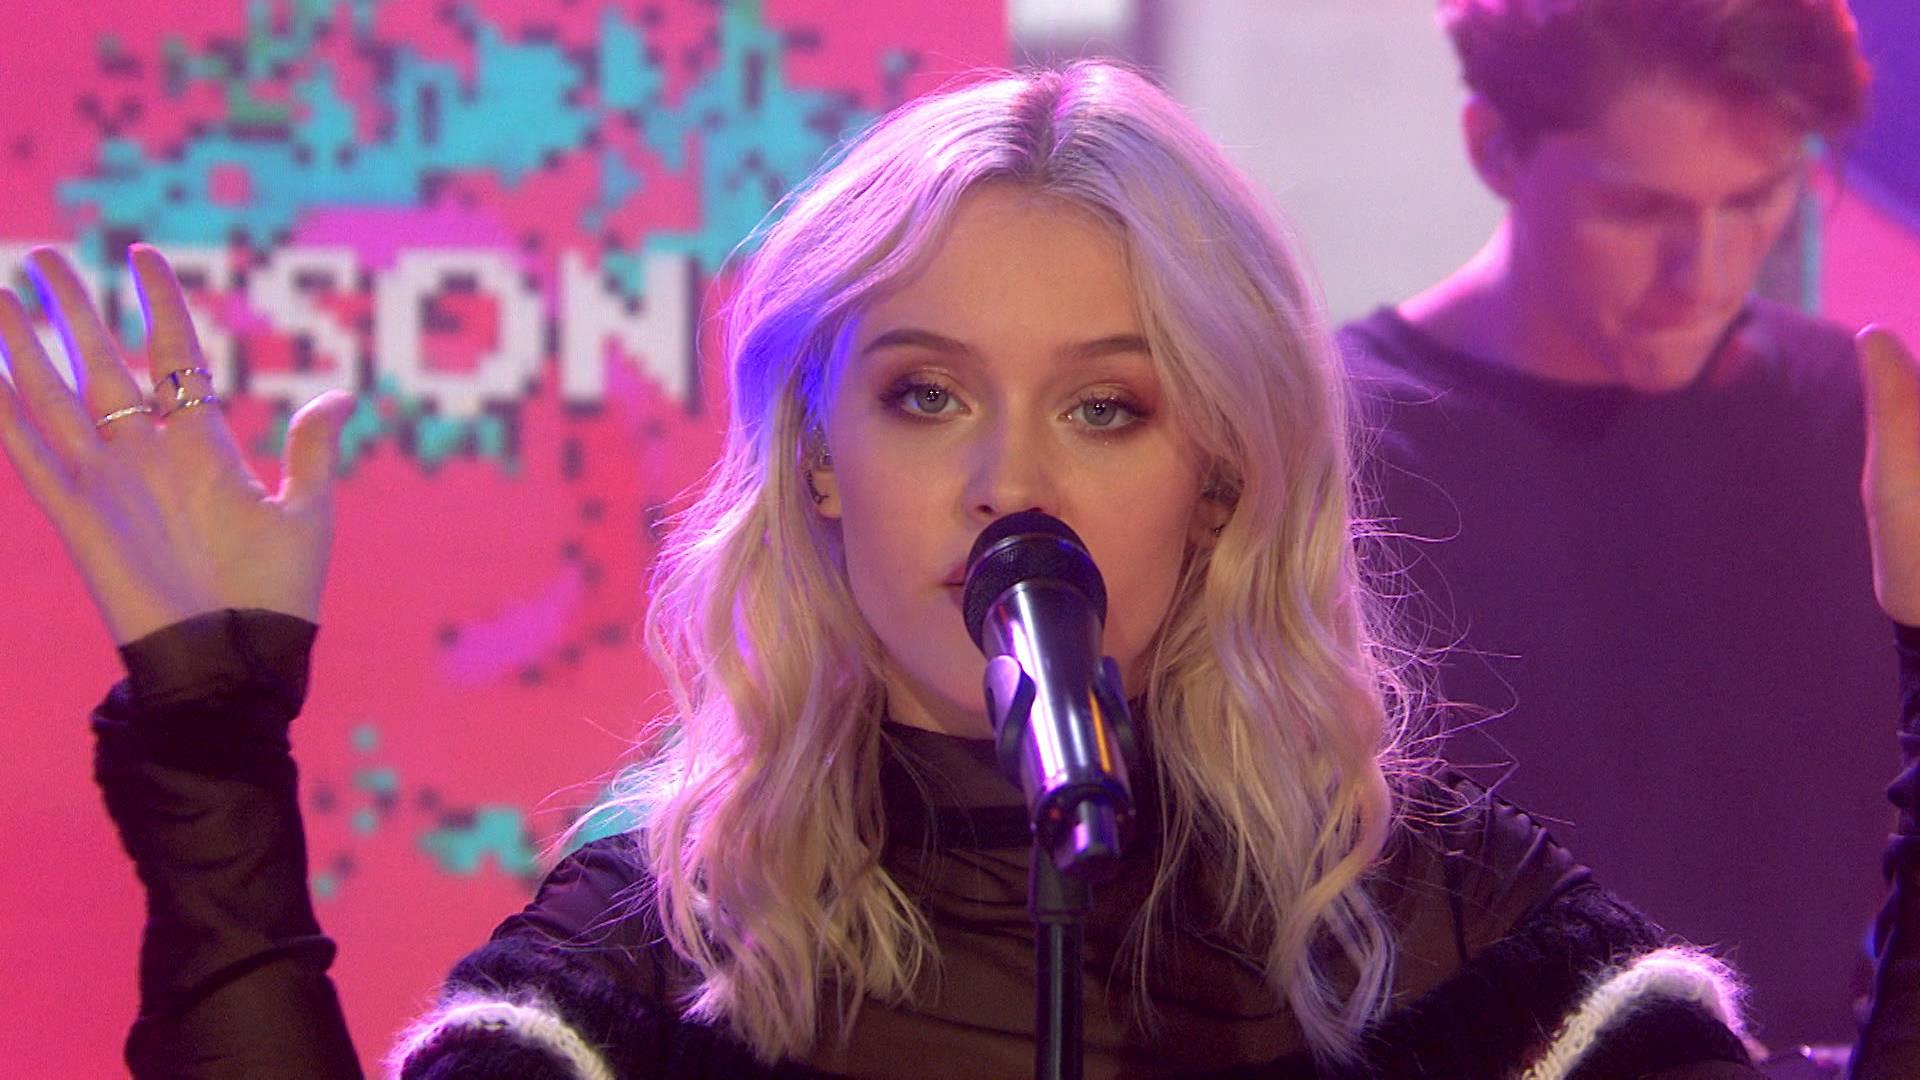 Watch Zara Larsson play 'Would you rather?'